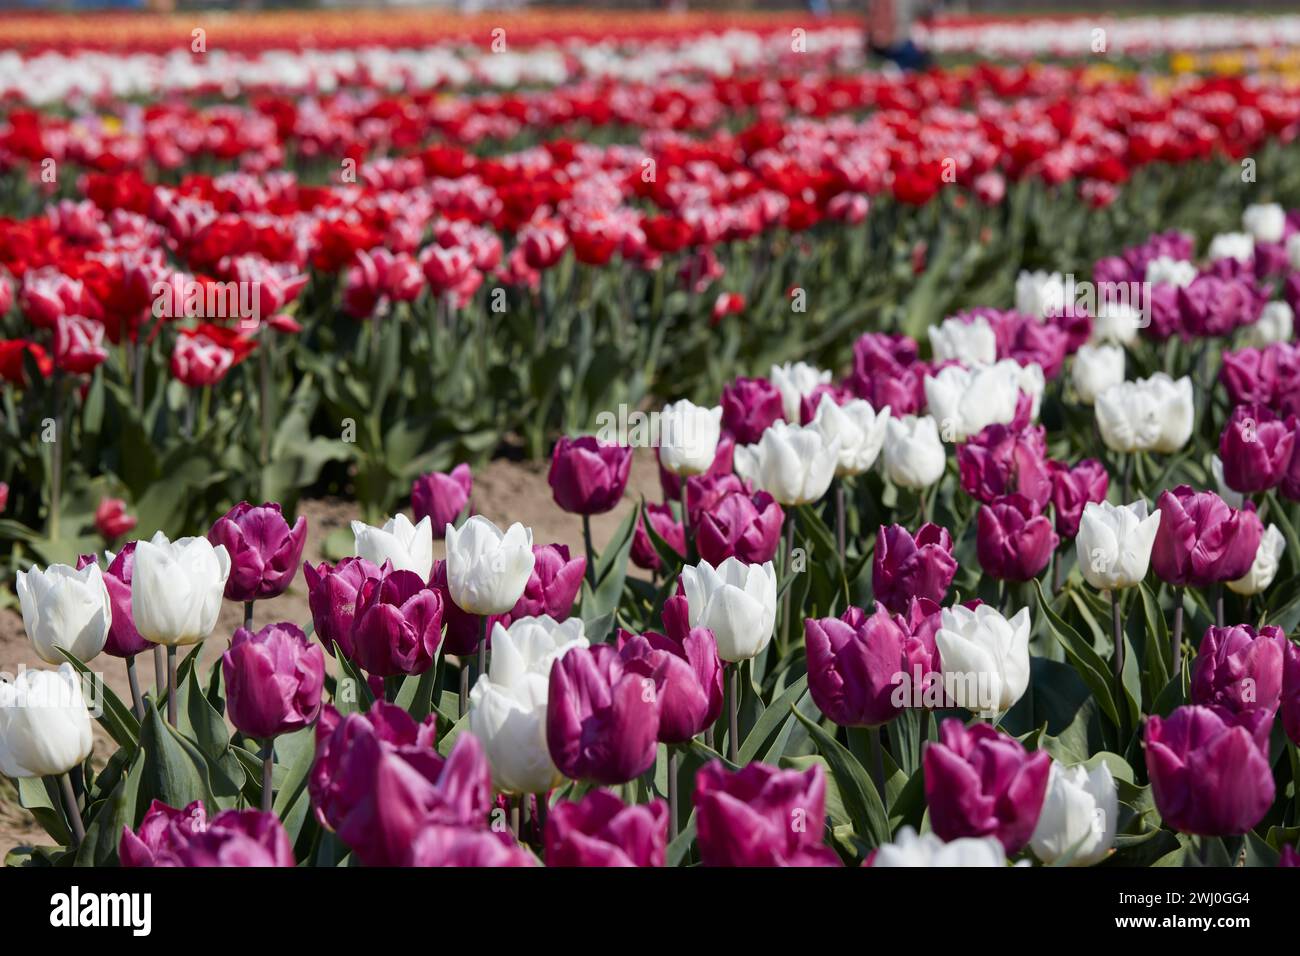 Tulip flowers in white, purple, red, pink colors and field in spring sunlight Stock Photo